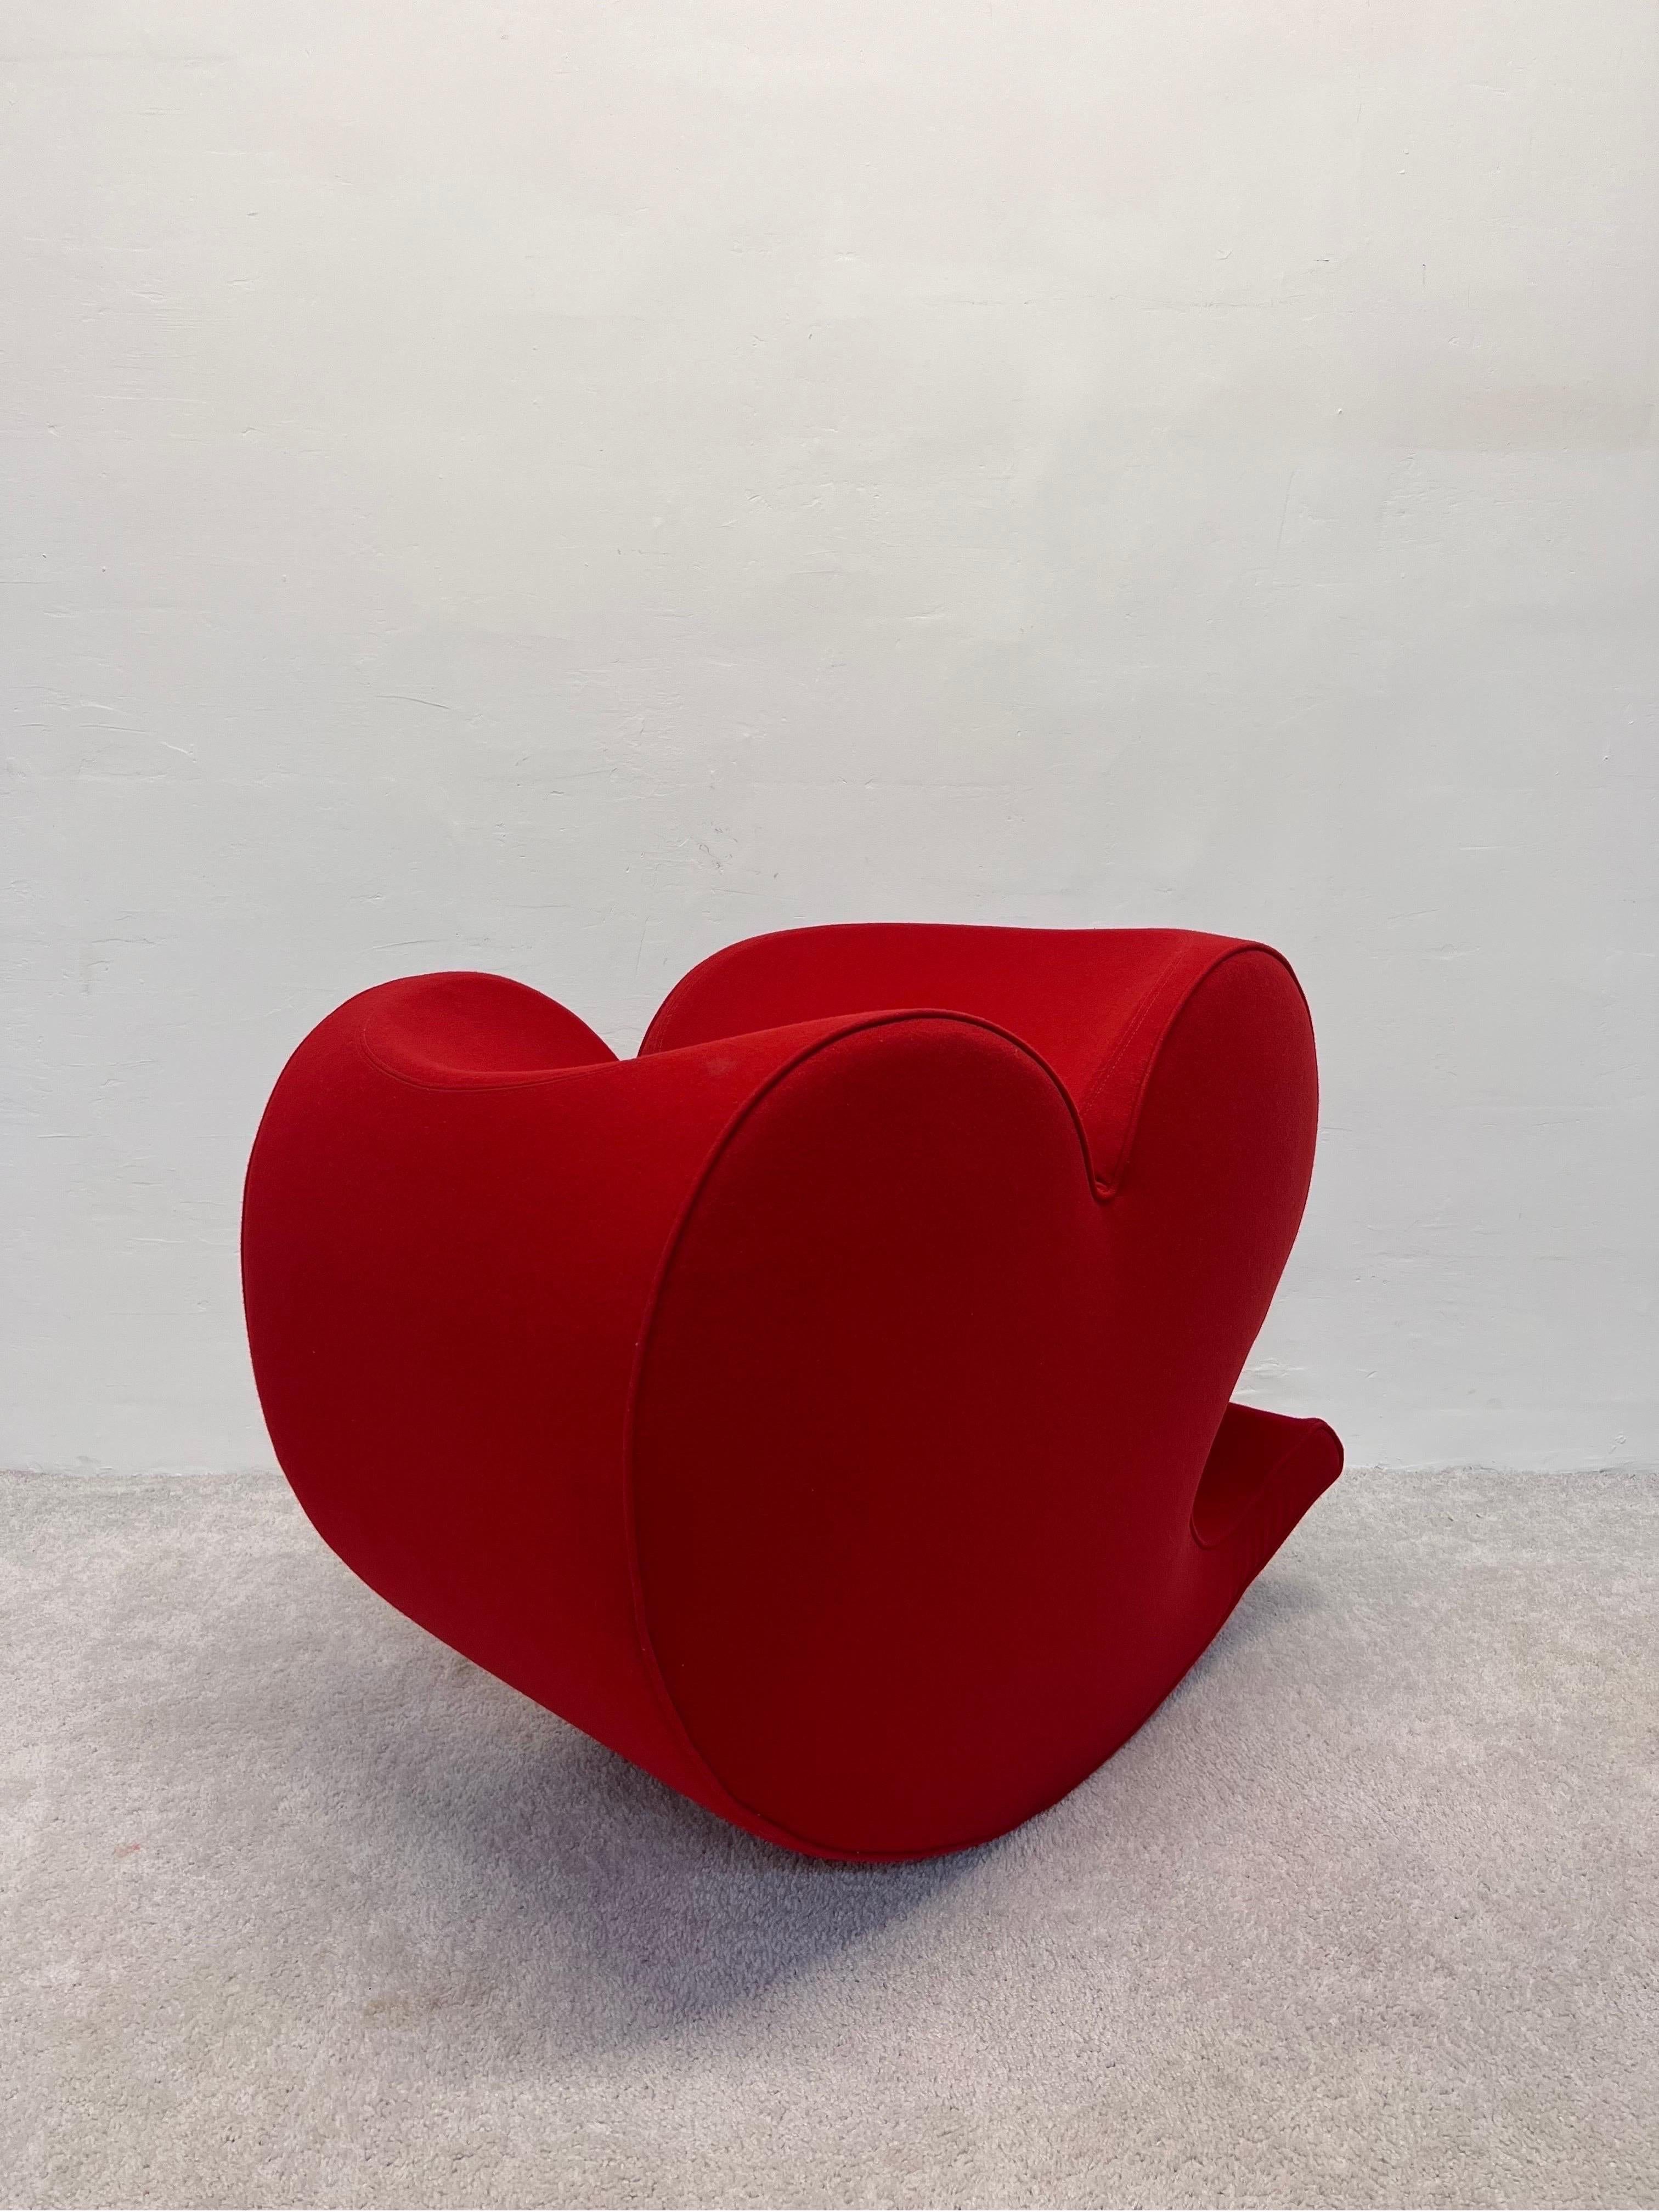 Spring Collection Soft Heart chair designed by Ron Arad in 1988 for Moroso. This example is from the early 1990s. The base of the chair is weighted with a heavy steel plate for counterbalance. The original red wool fabric is in great condition and